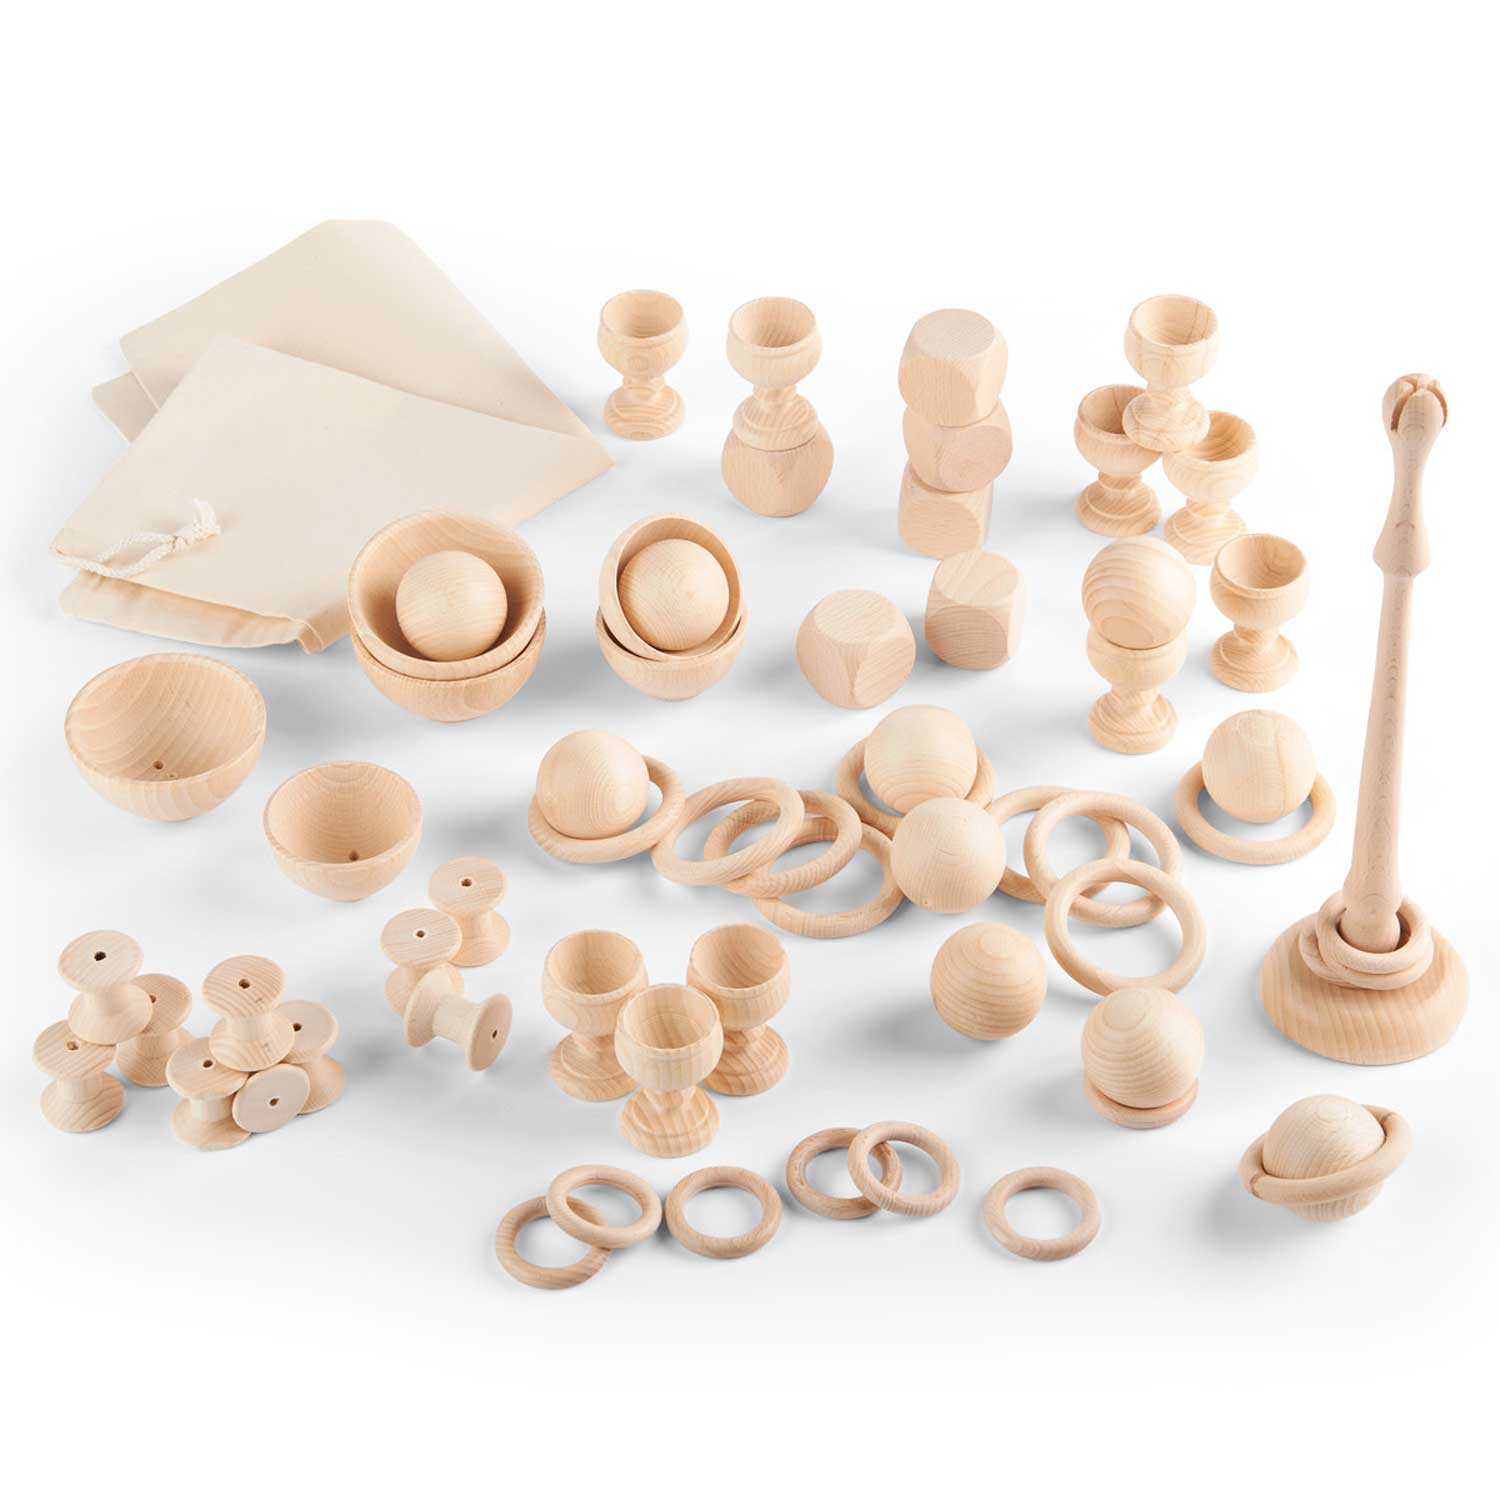 Heuristic Starter Play Set, 63 Pieces